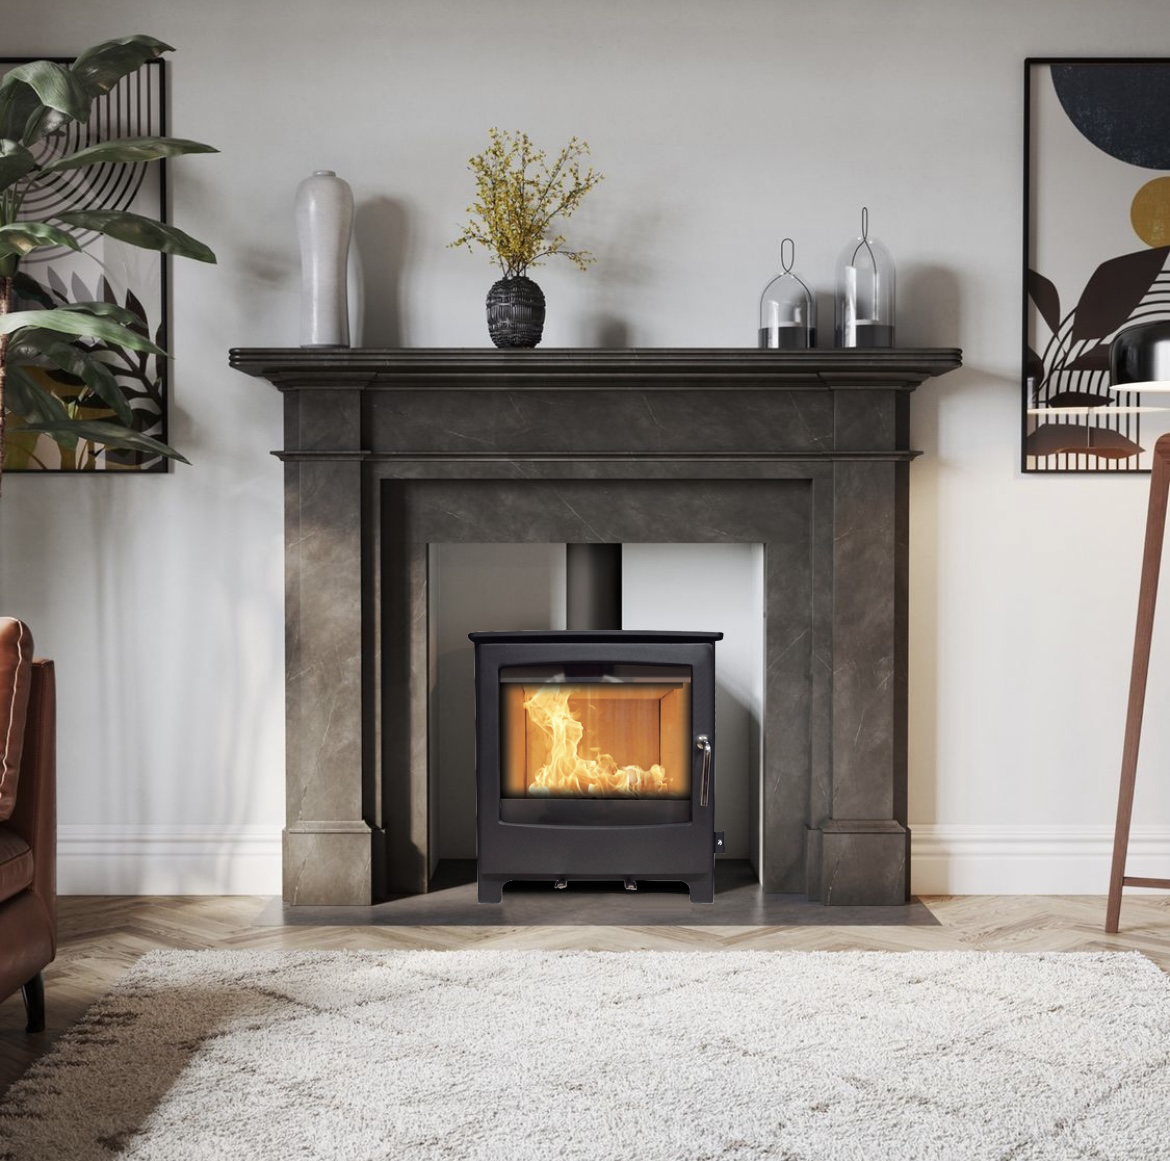 The Solway multifuel Stove has an elegant style